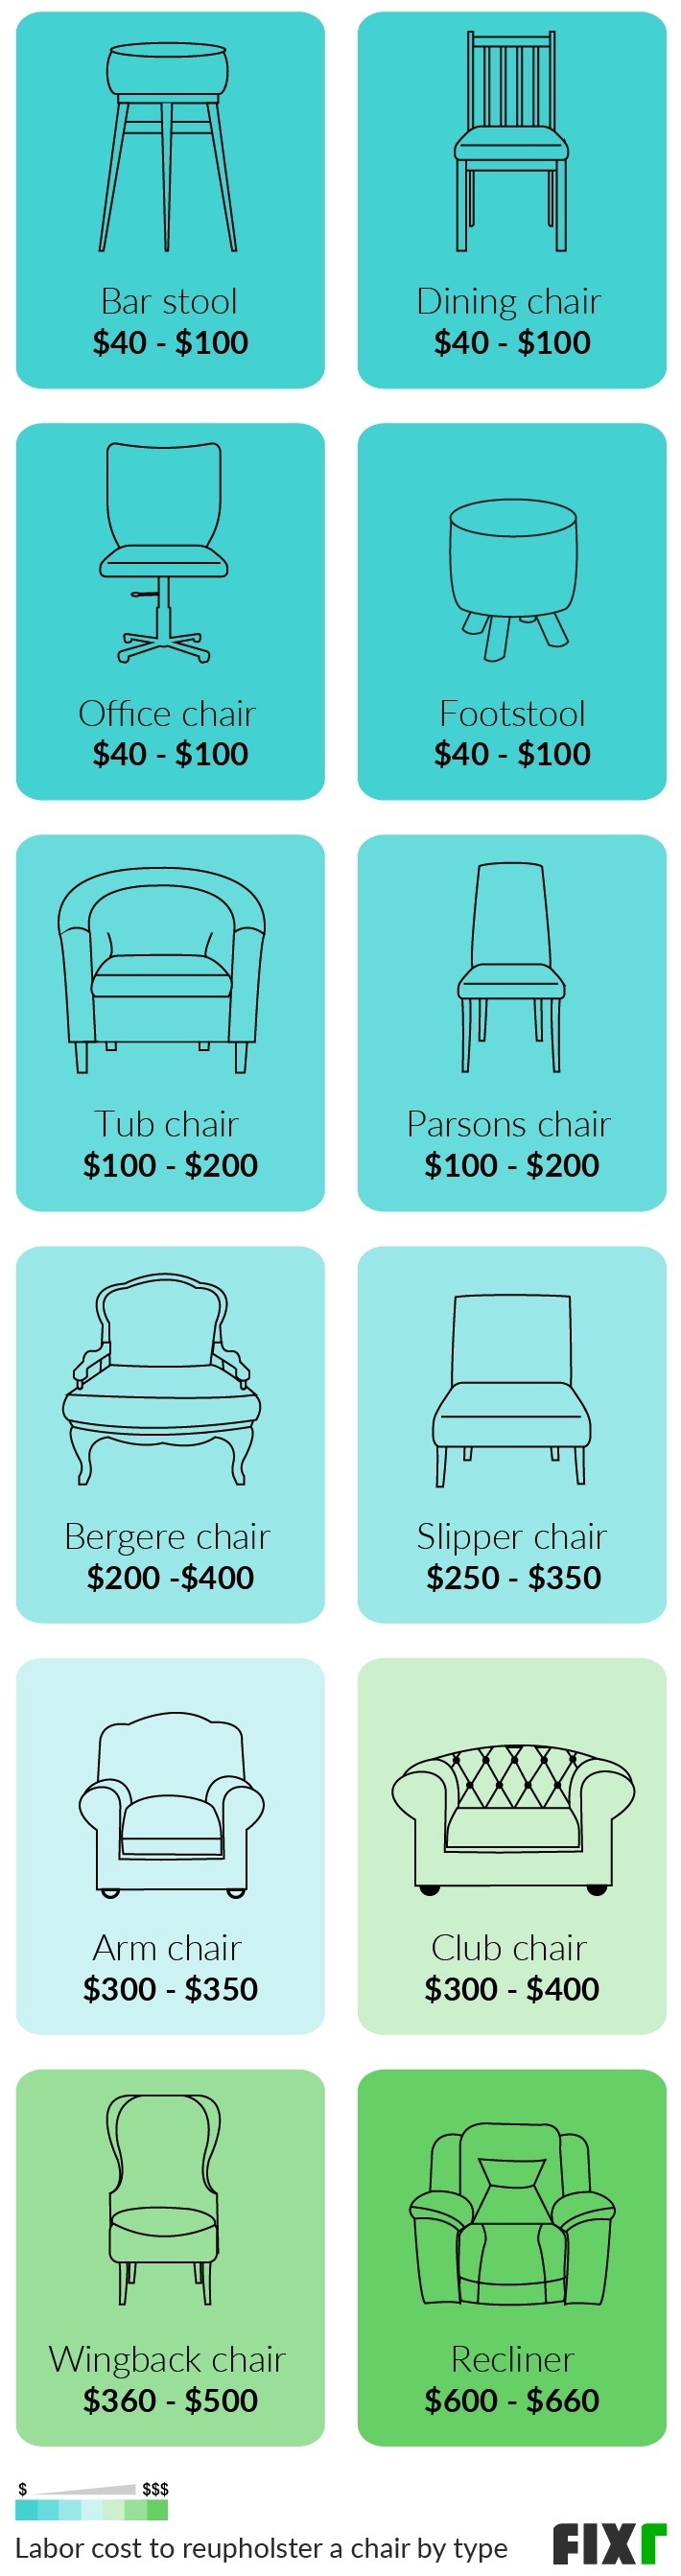 Labor Cost to Reupholster a Dining Chair, Footstool, Parsons Chair, Slipper Chair, Arm Chair, Wingback Chair, Recliner...